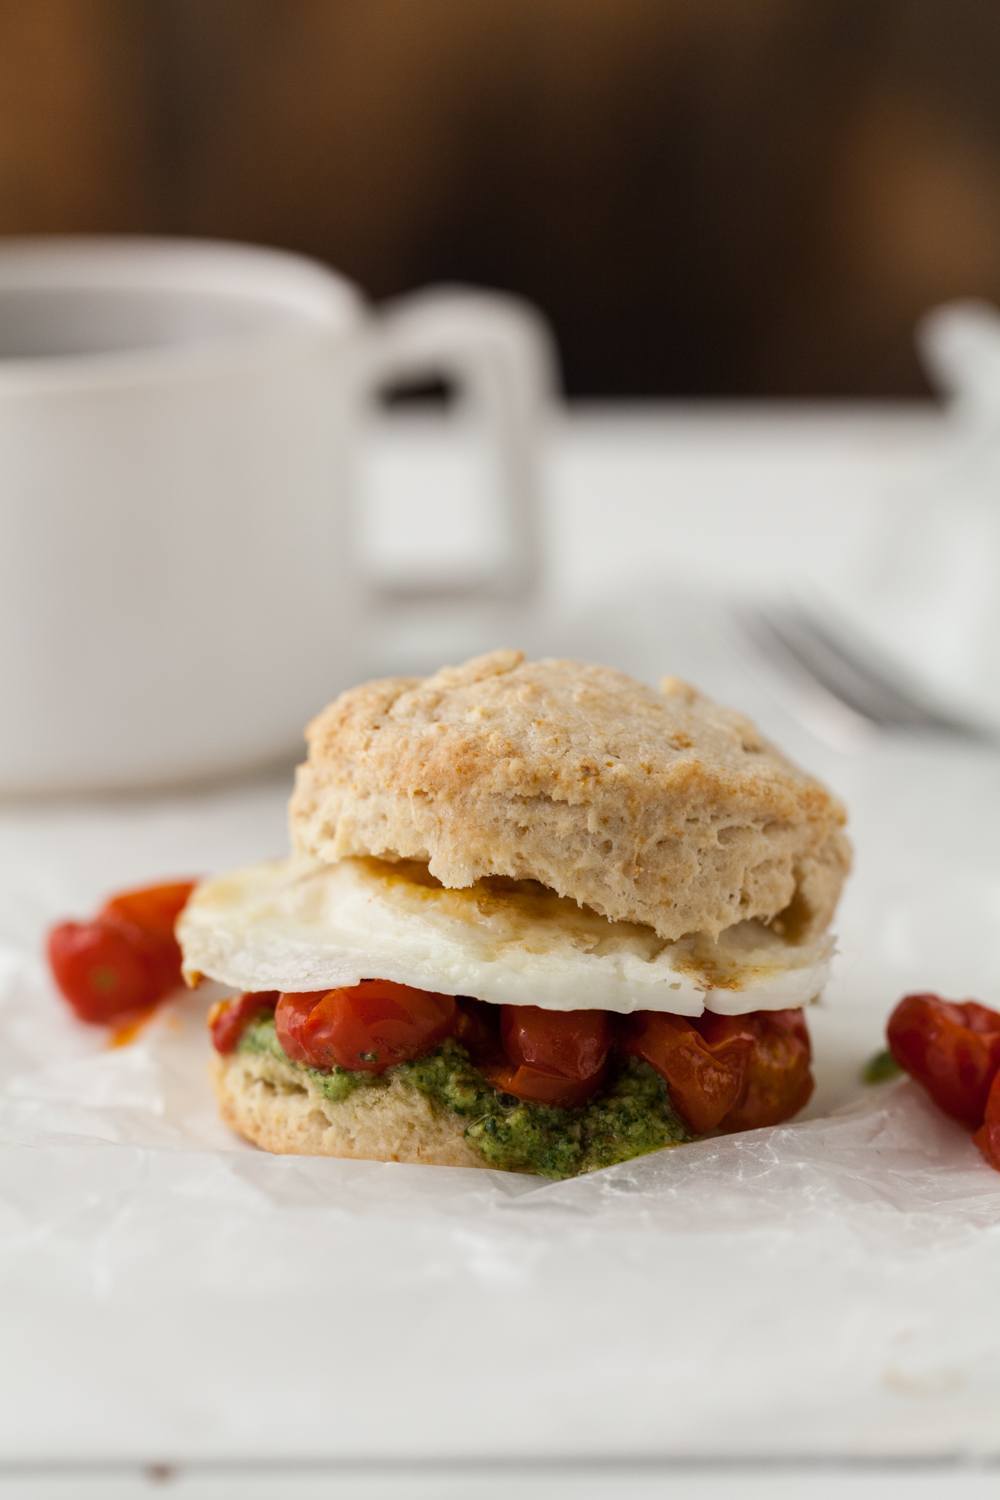 Egg, Roasted Tomato, and Pesto Biscuit Sandwich